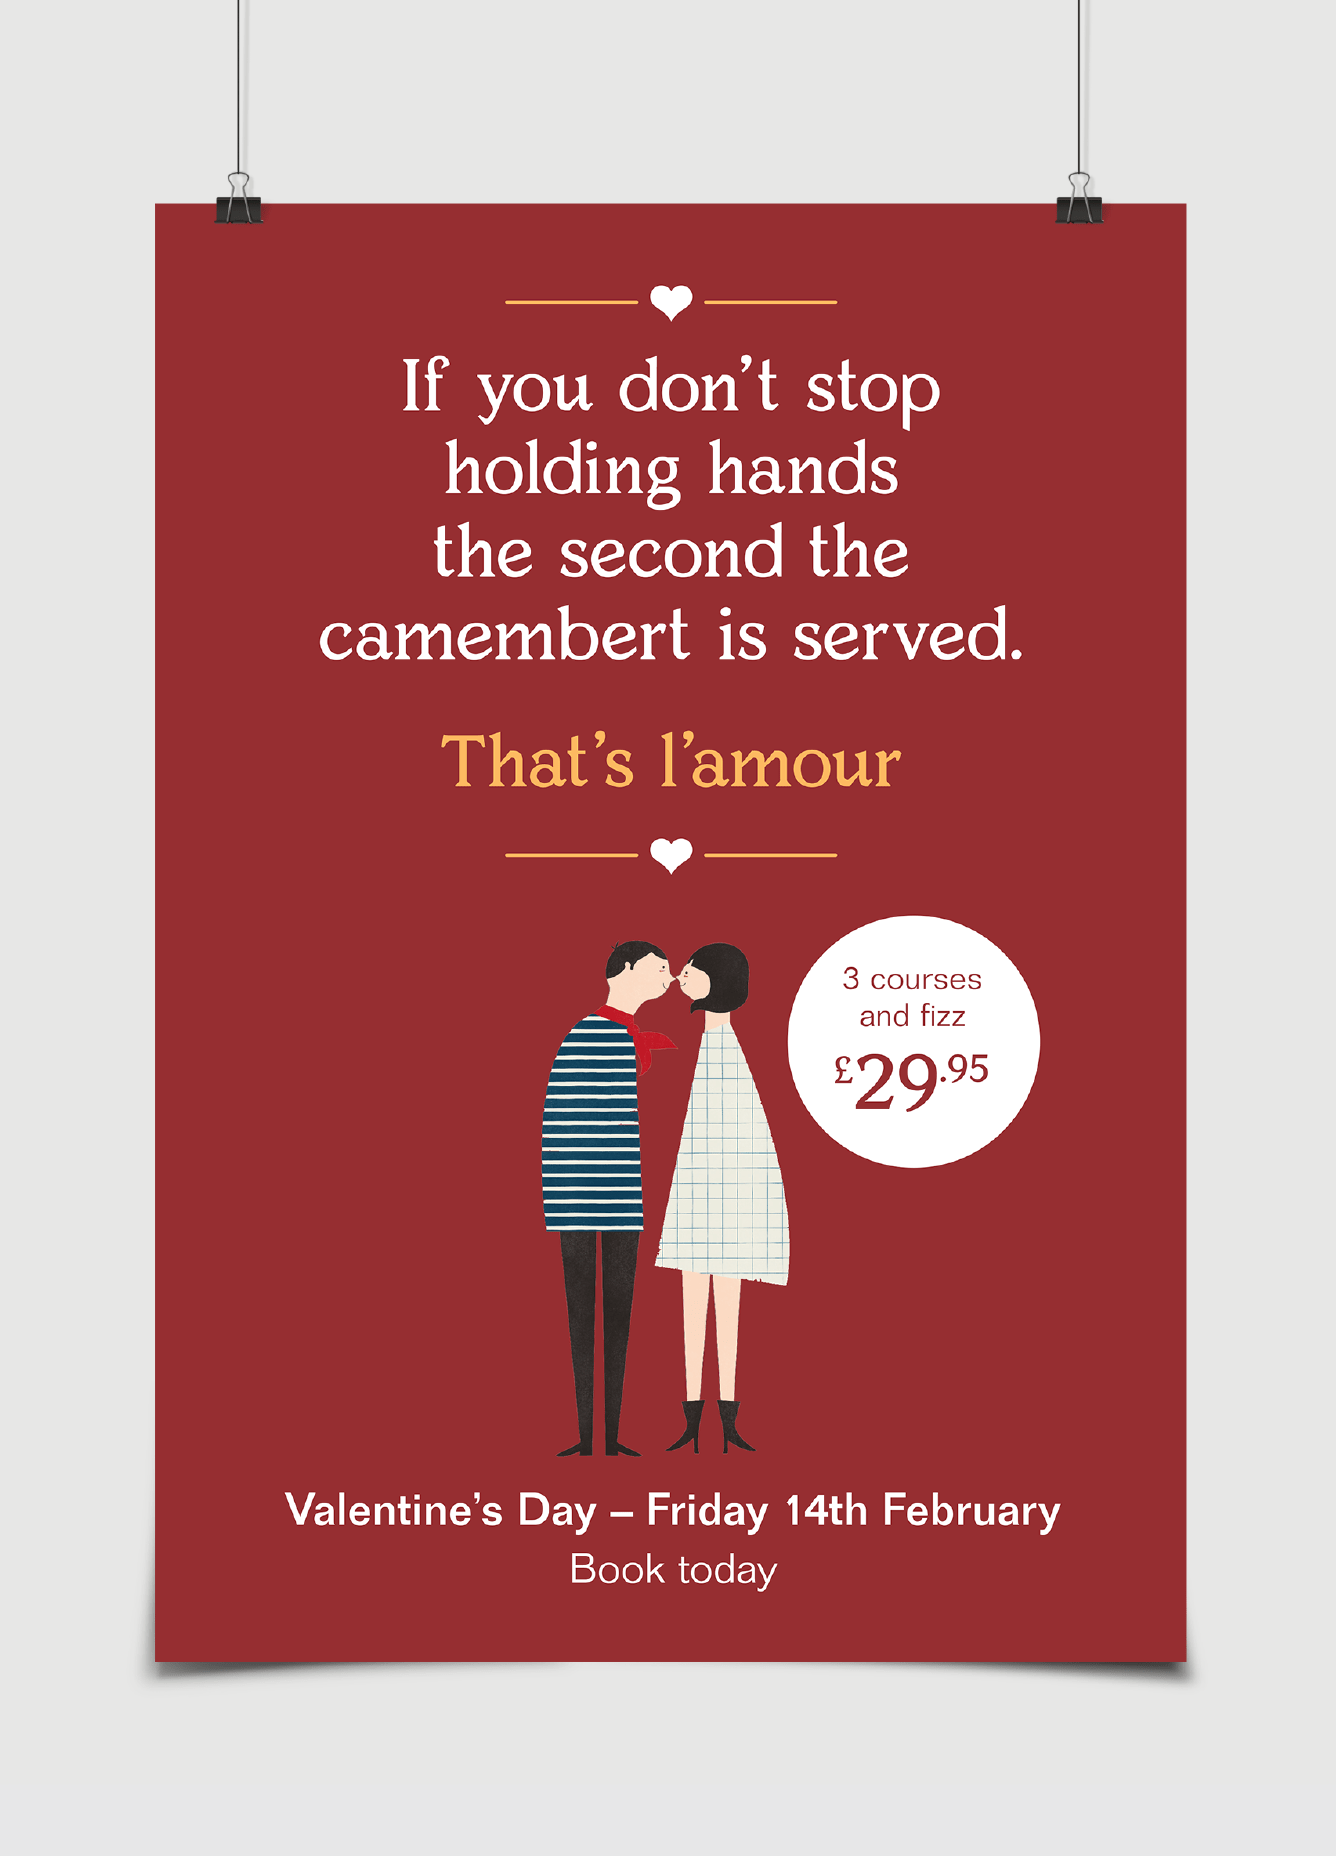 Bistrot Pierre — Valentine’s Day Campaign — If you don't stop holding hands the second the Camembert is served. That's l'amour.